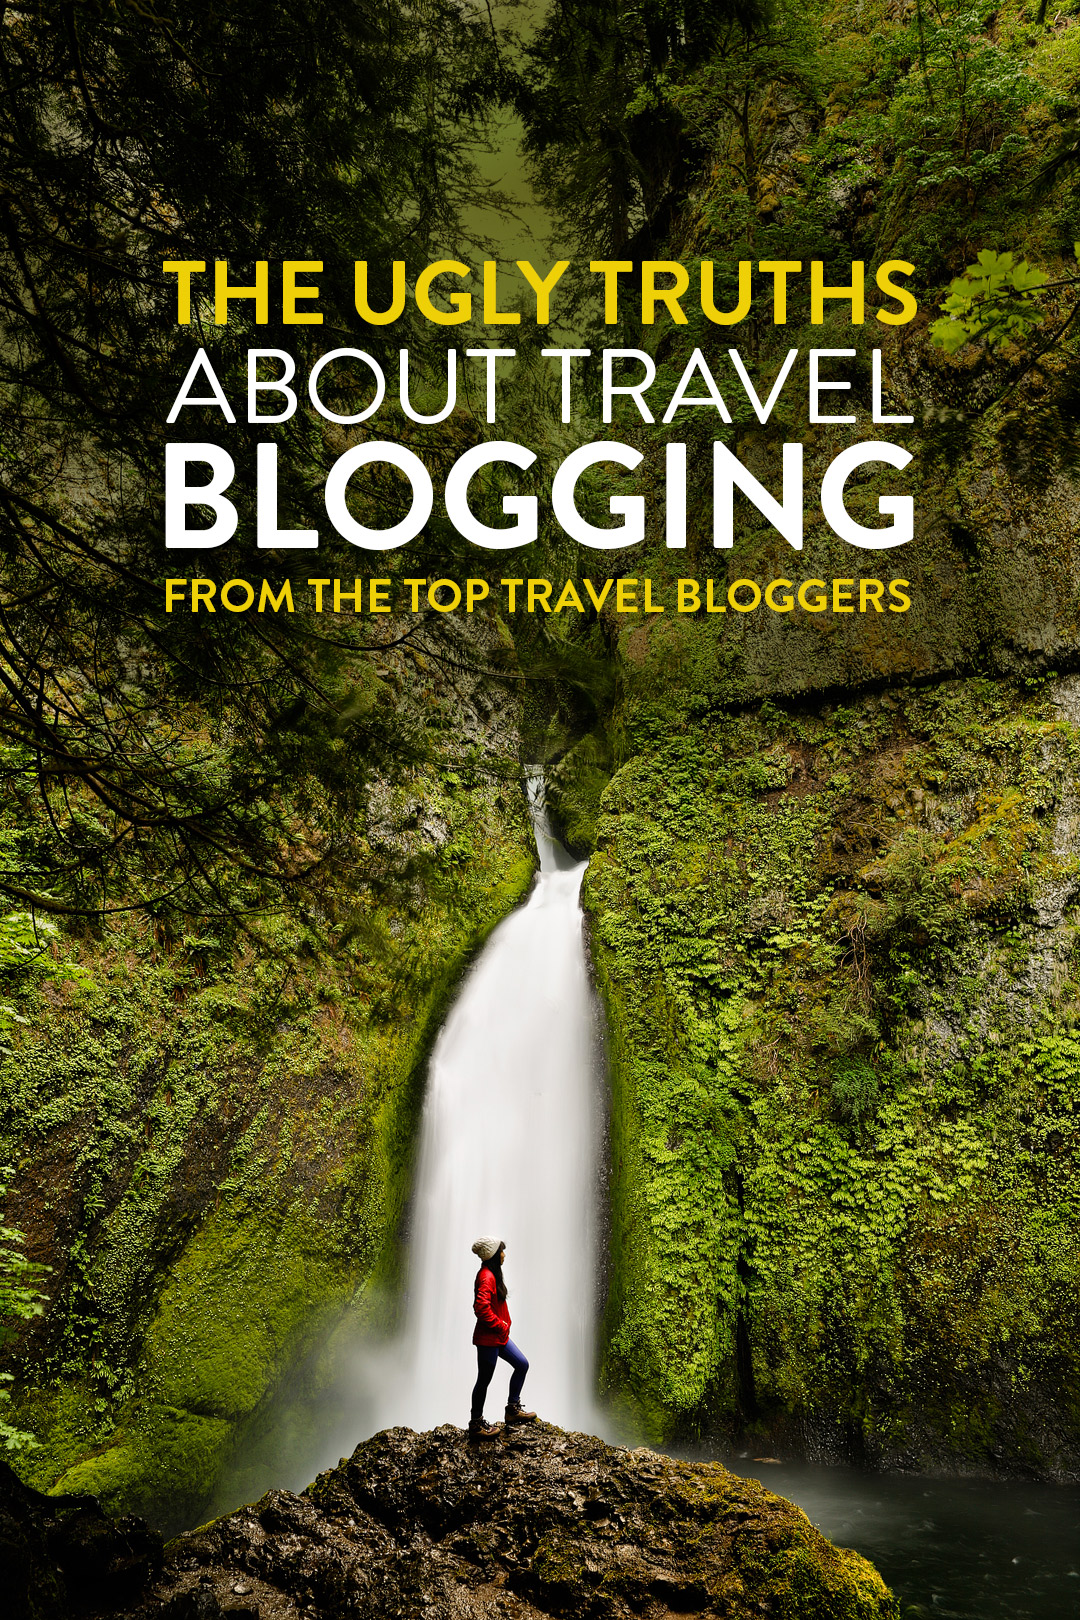 The Ugly Truths of Being a Professional Travel Blogger // Eearth Travel #blogging #travelblogger #ontheblog